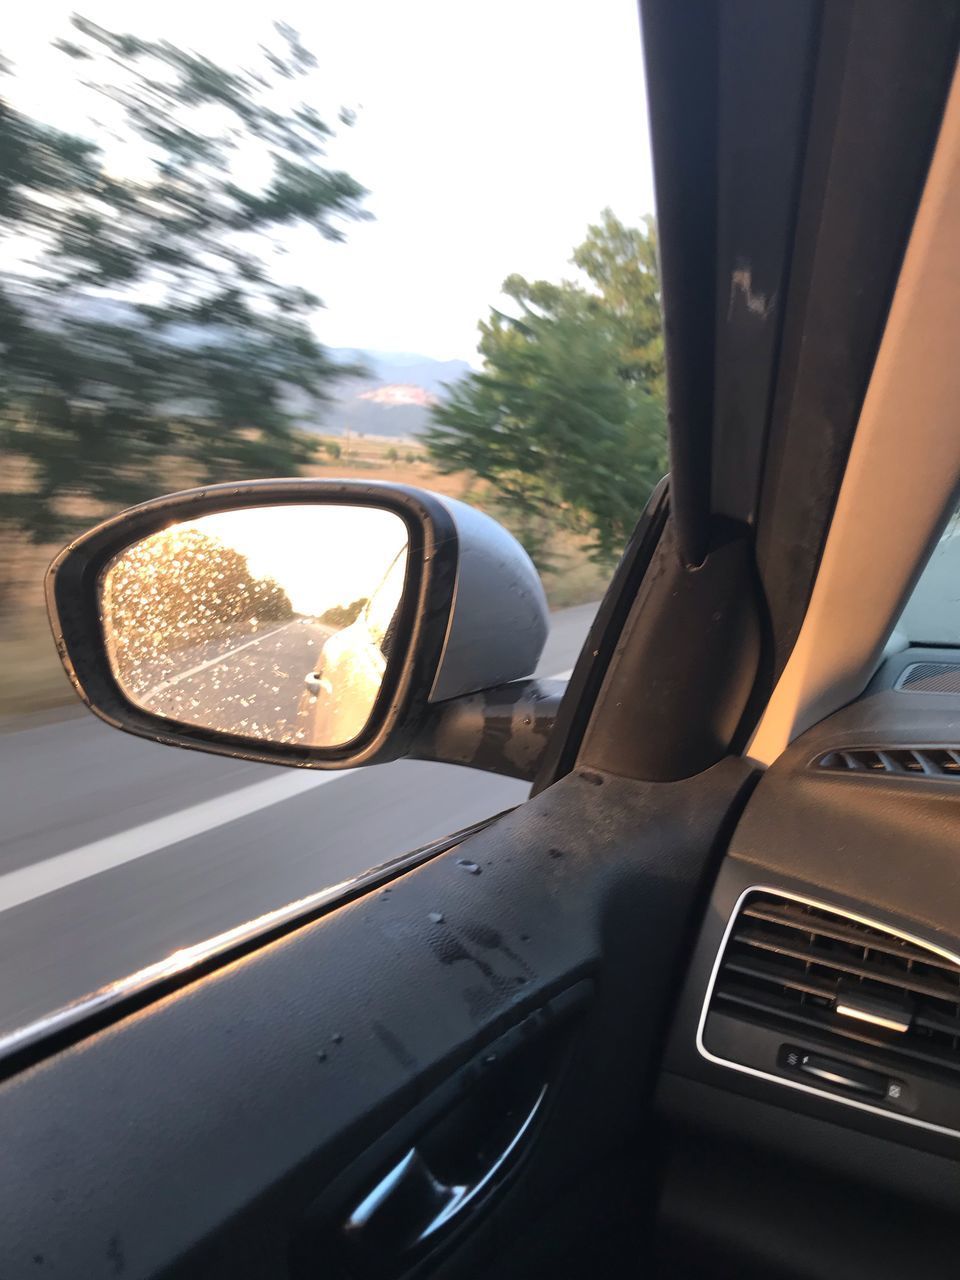 REFLECTION OF TREES IN CAR MIRROR